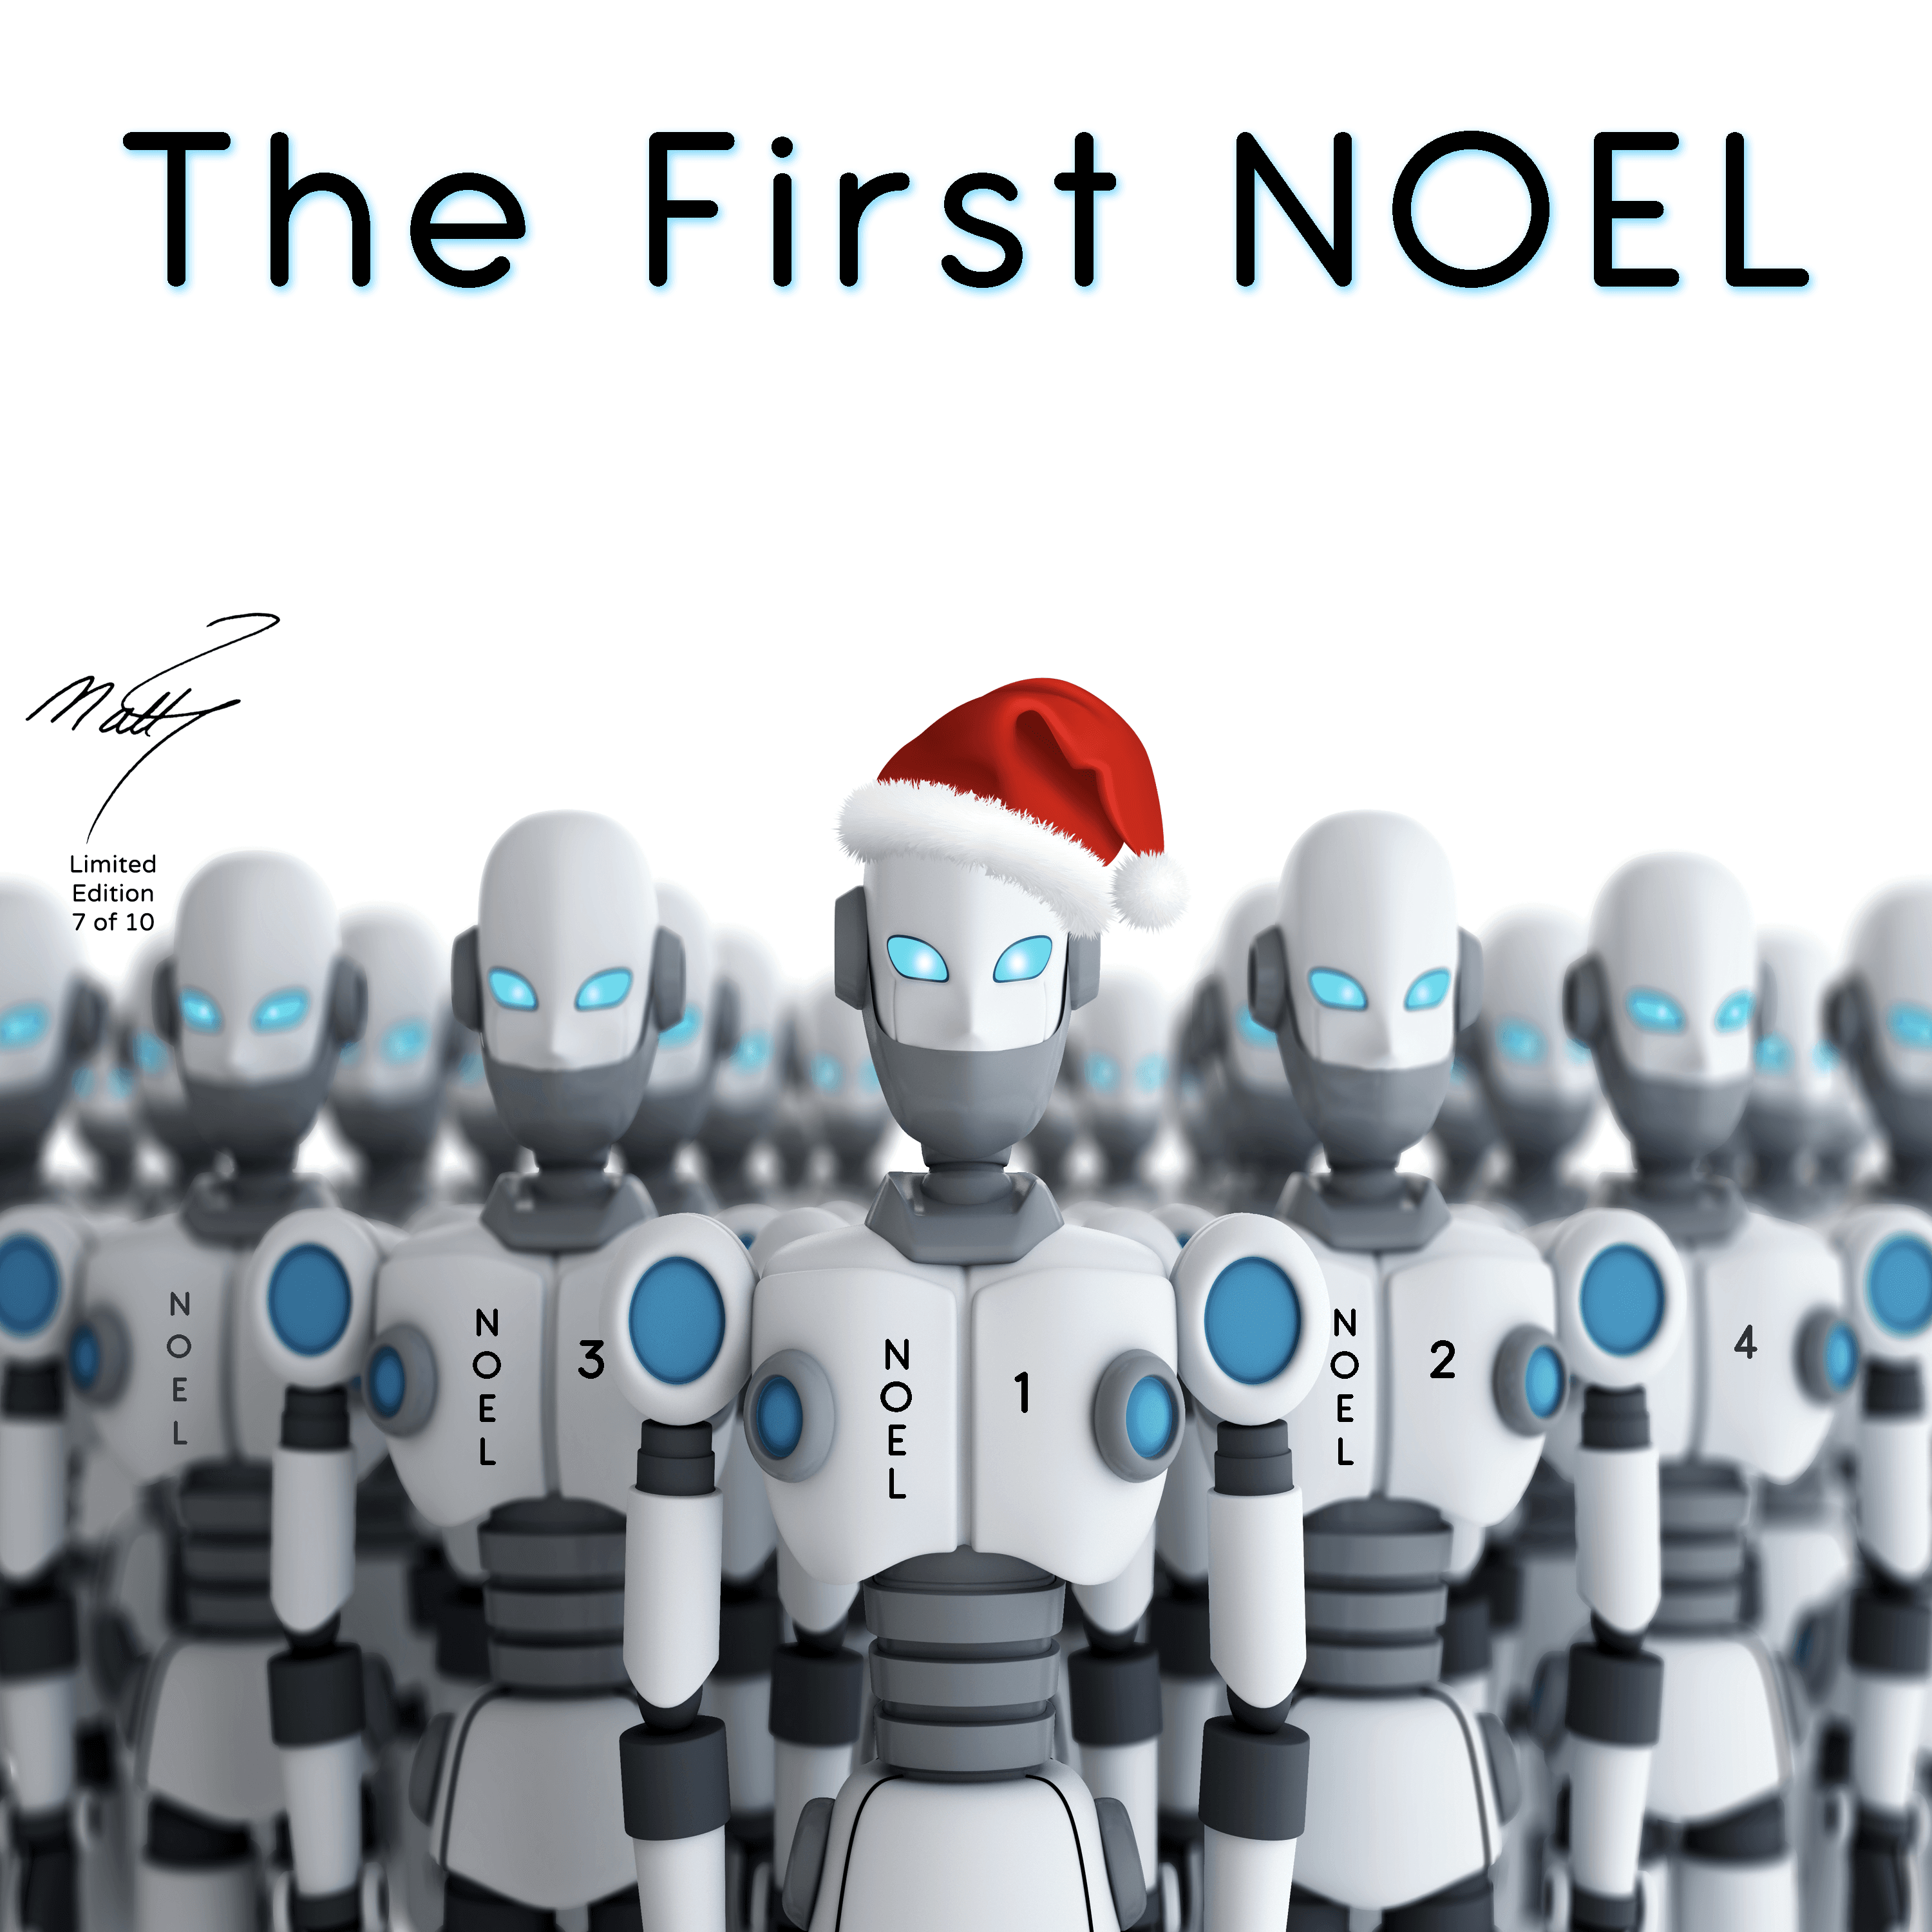 "The First NOEL" by Matt Johnson-Autographed Limited Edition (7 of 10)